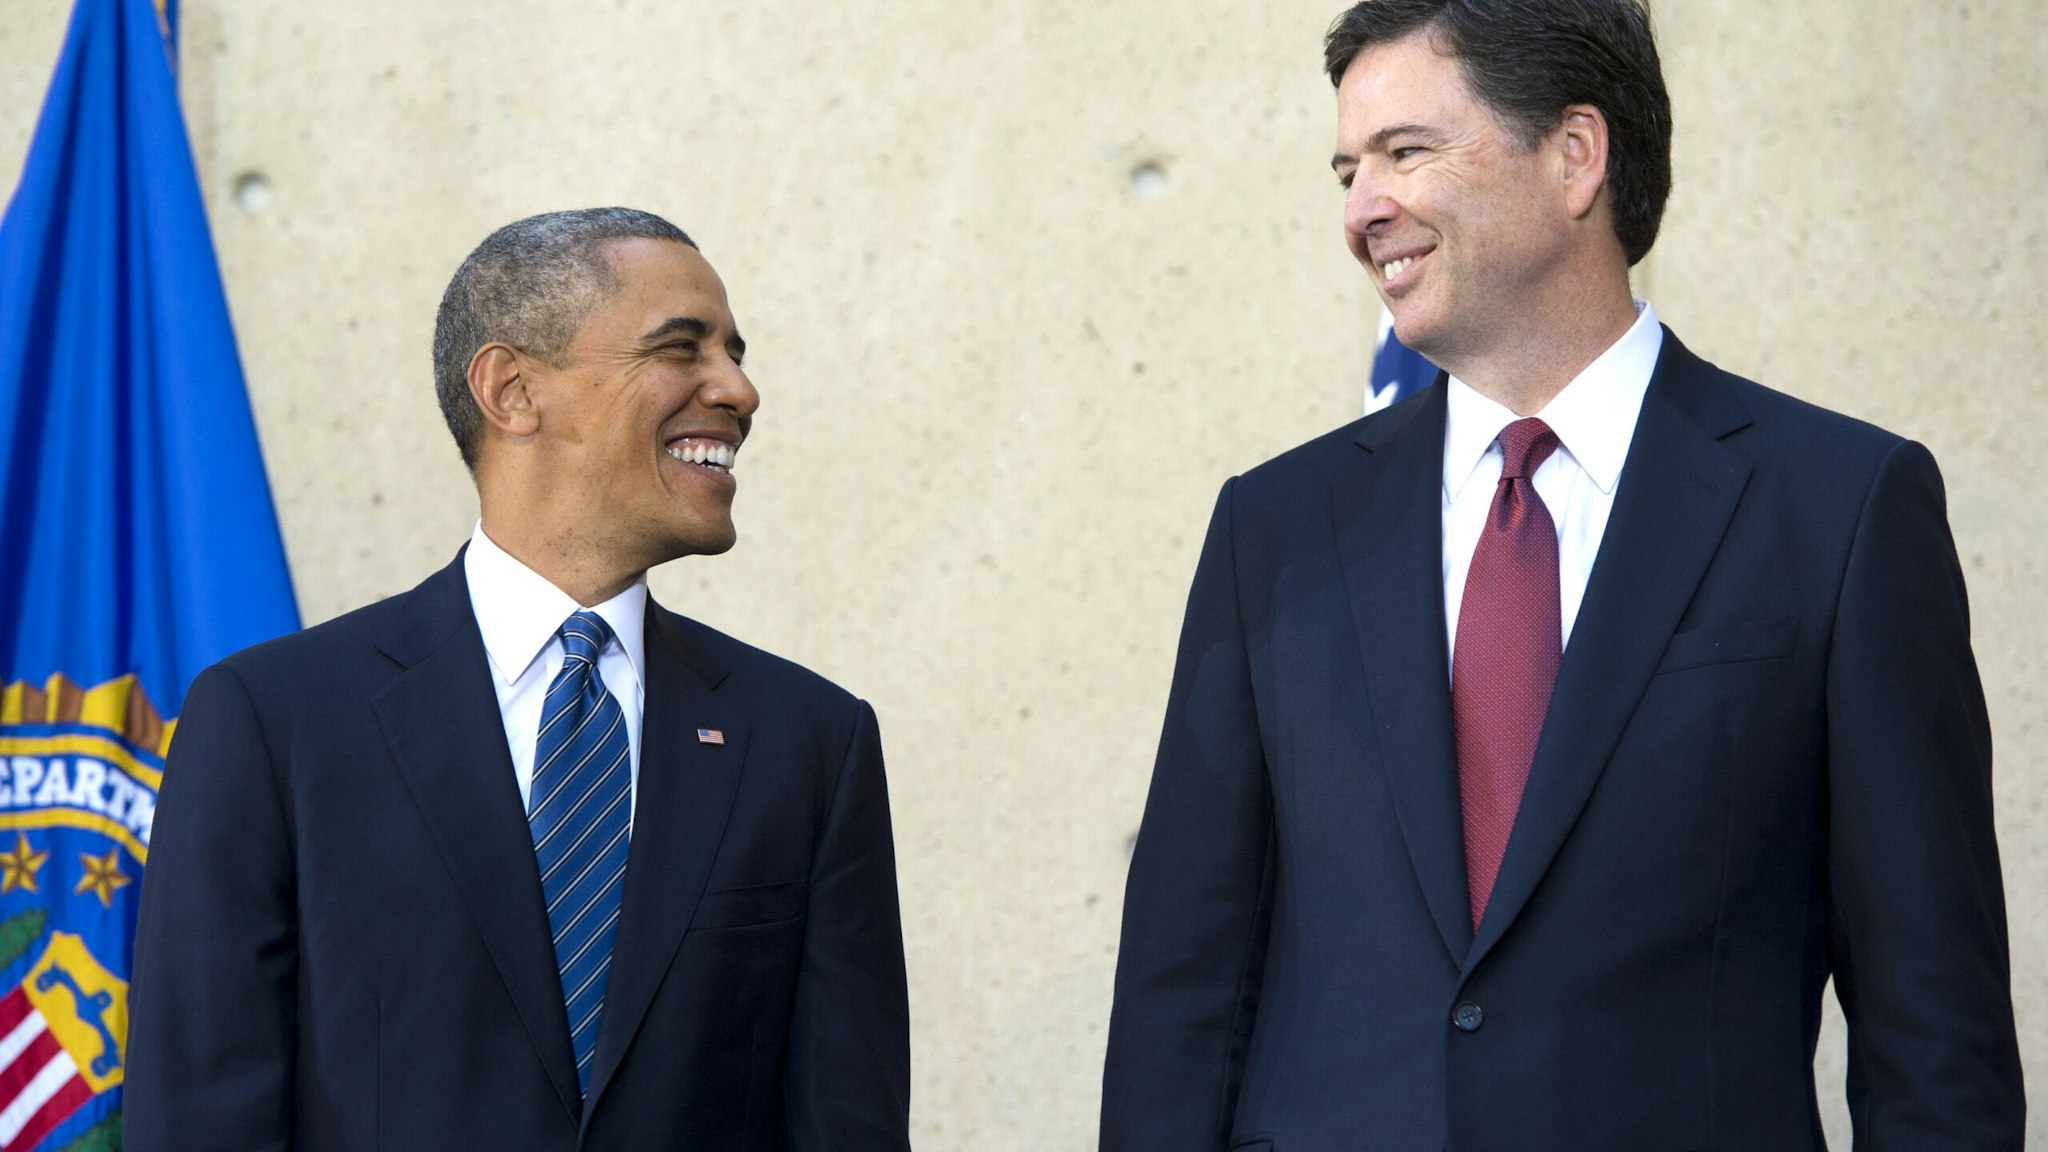 US President Barack Obama speaks with new FBI Director James Comey (R) during an installation ceremony at Federal Bureau of Investigation Headquarters in Washington, DC, October 28, 2013. Comey replaces longtime FBI Director Robert Mueller, who recently retired after 12 years leading the organization.